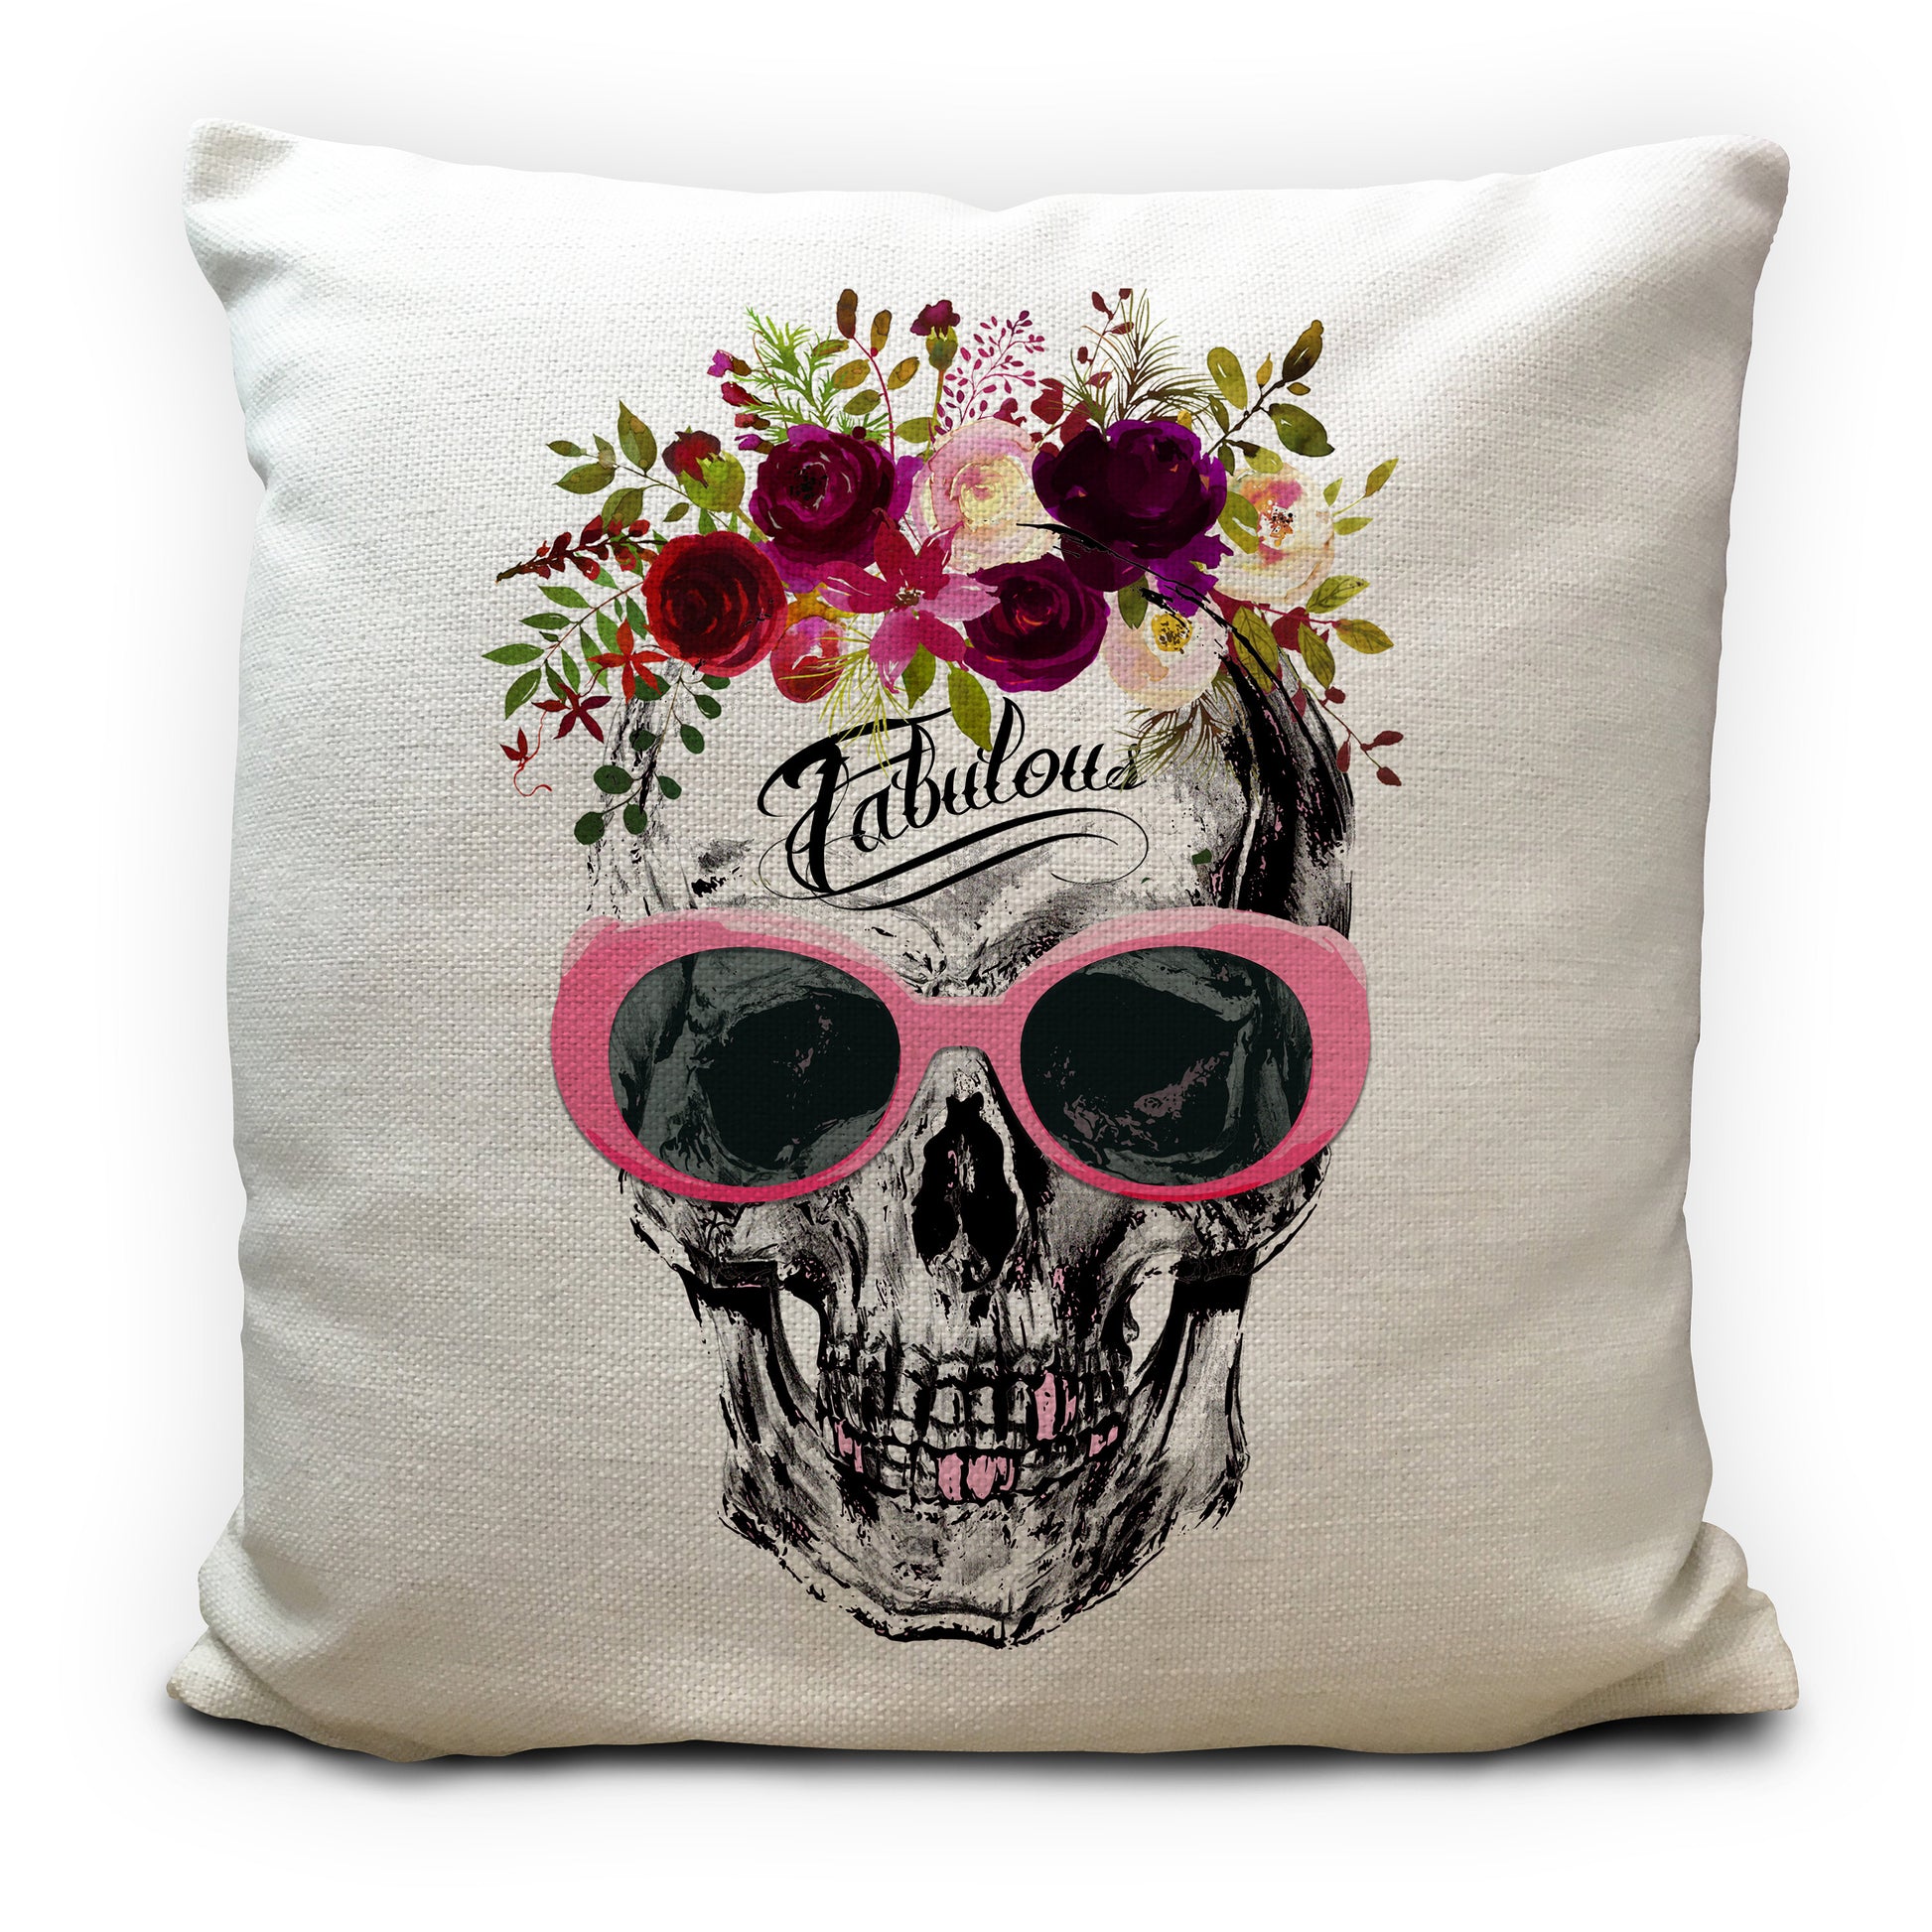 gothic skull cushion cover with sunglasses and flowers fabulous tattoo